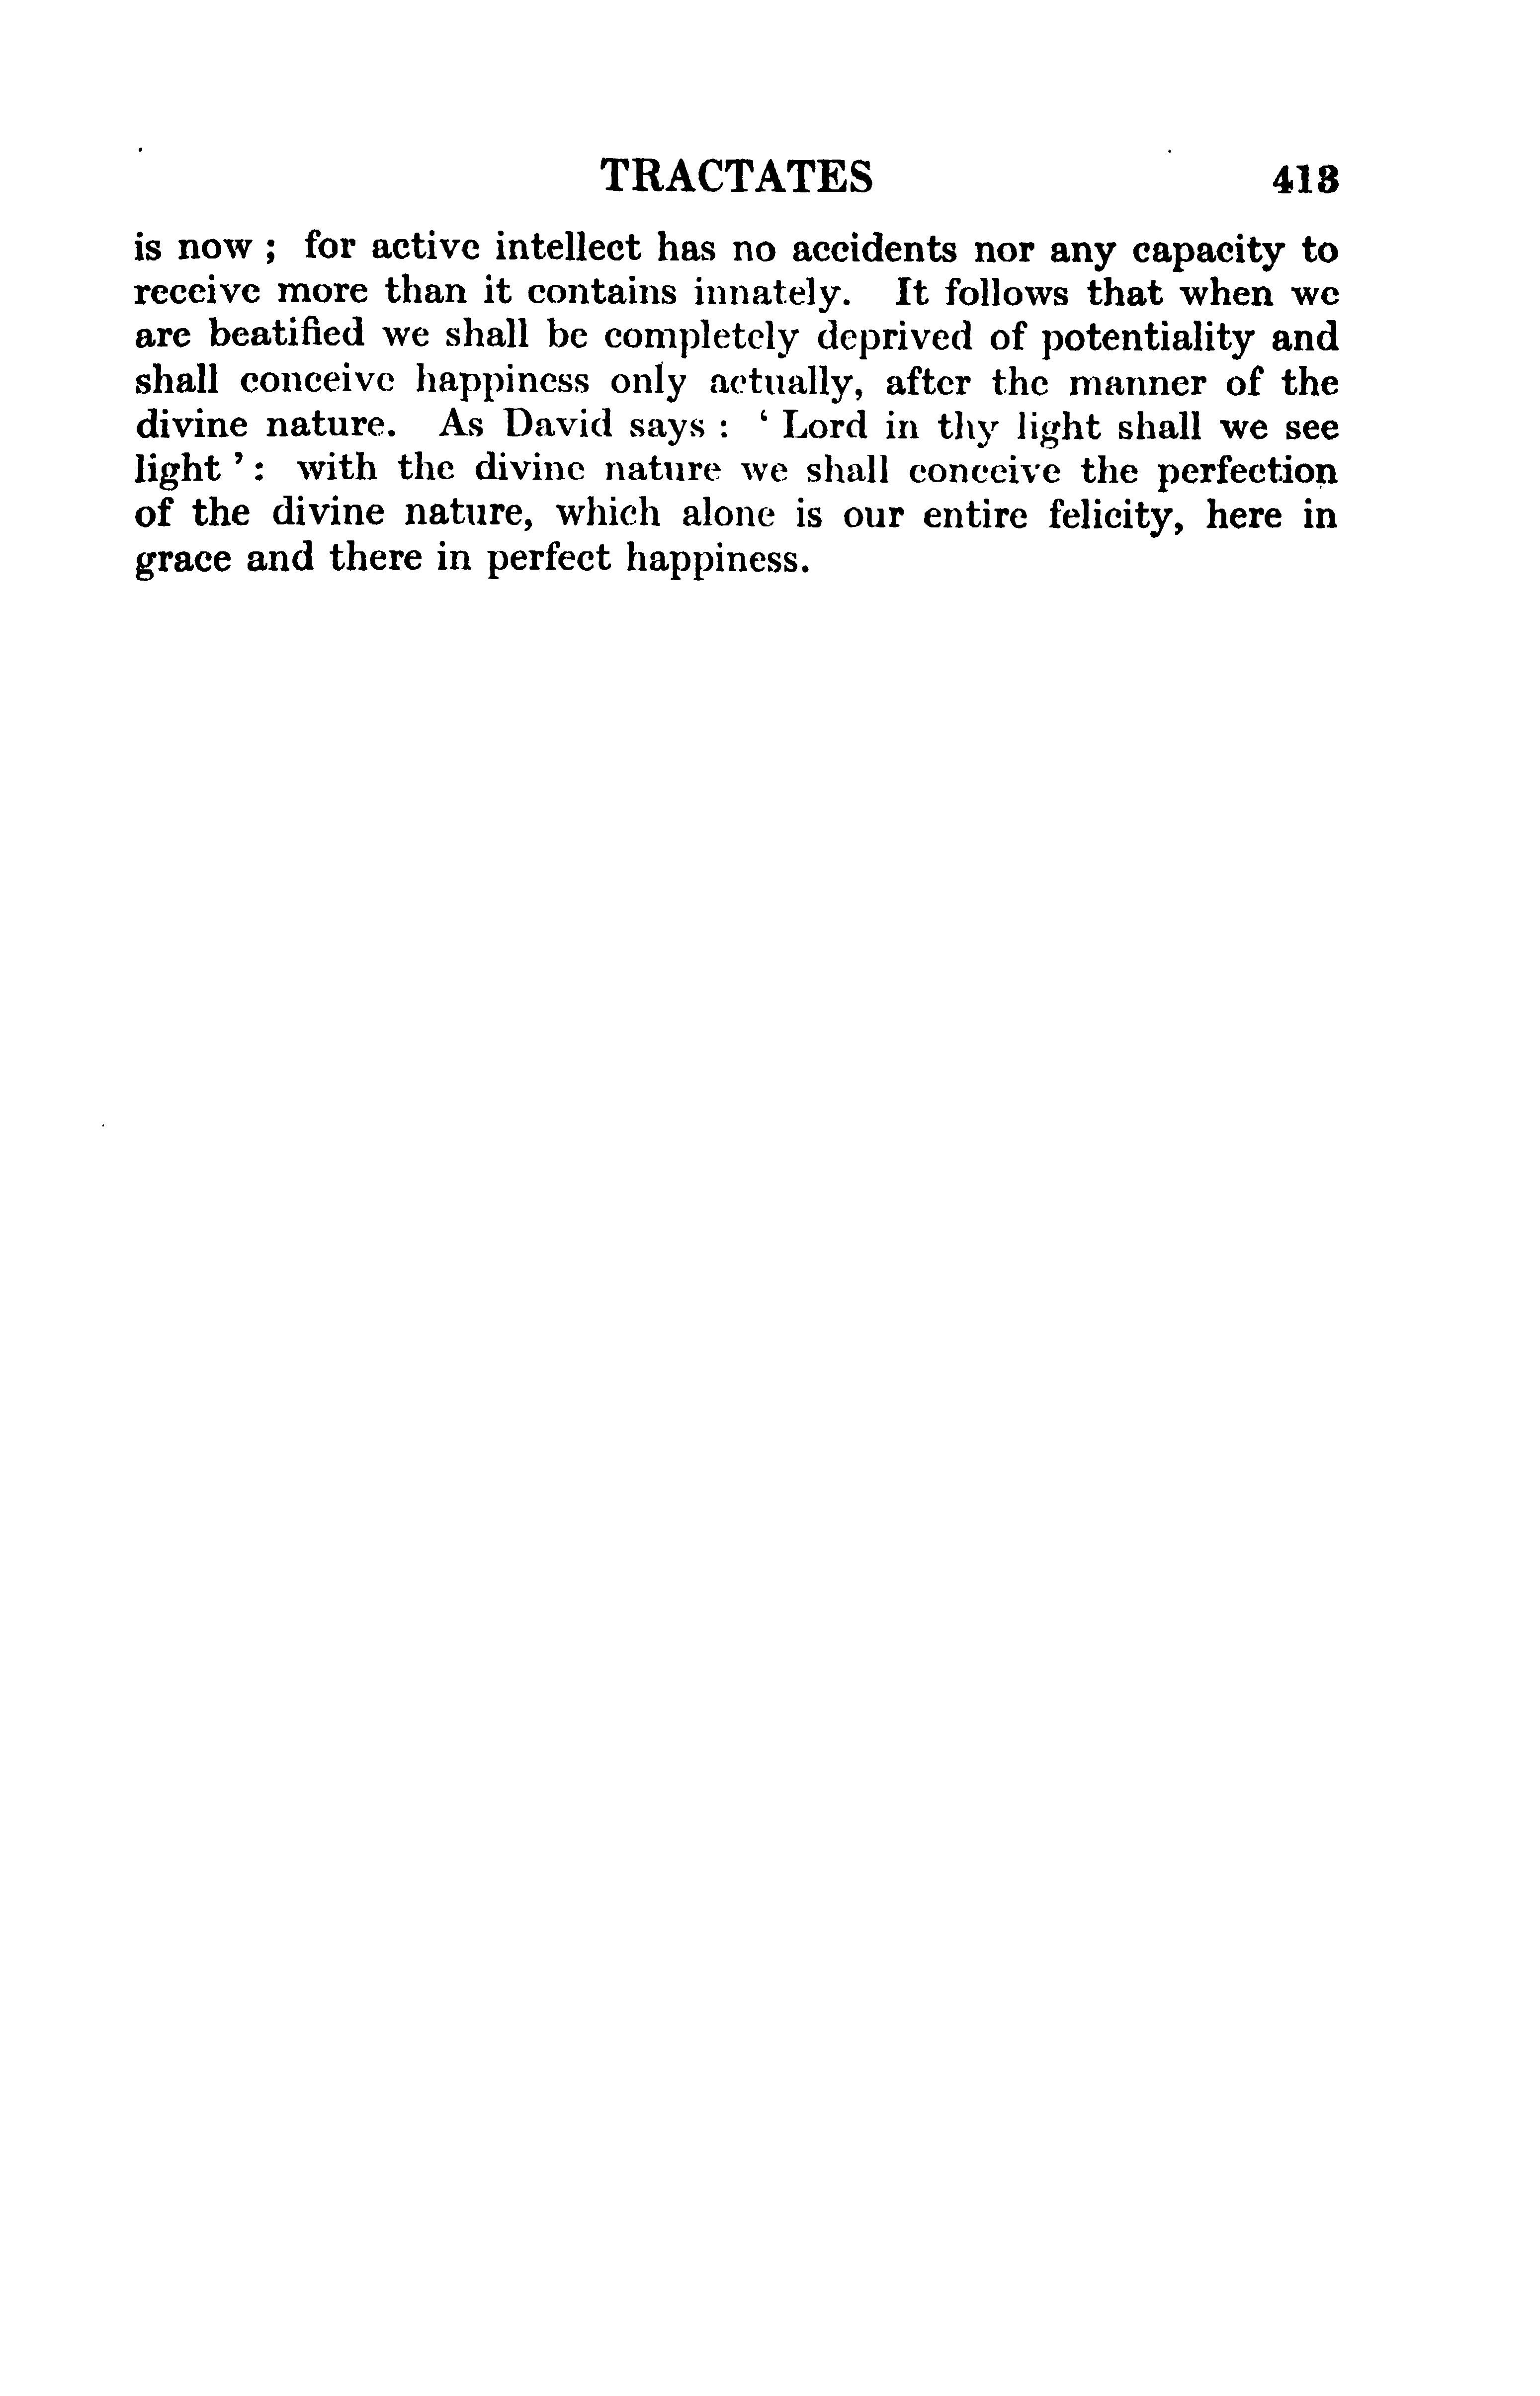 Image of page 0437